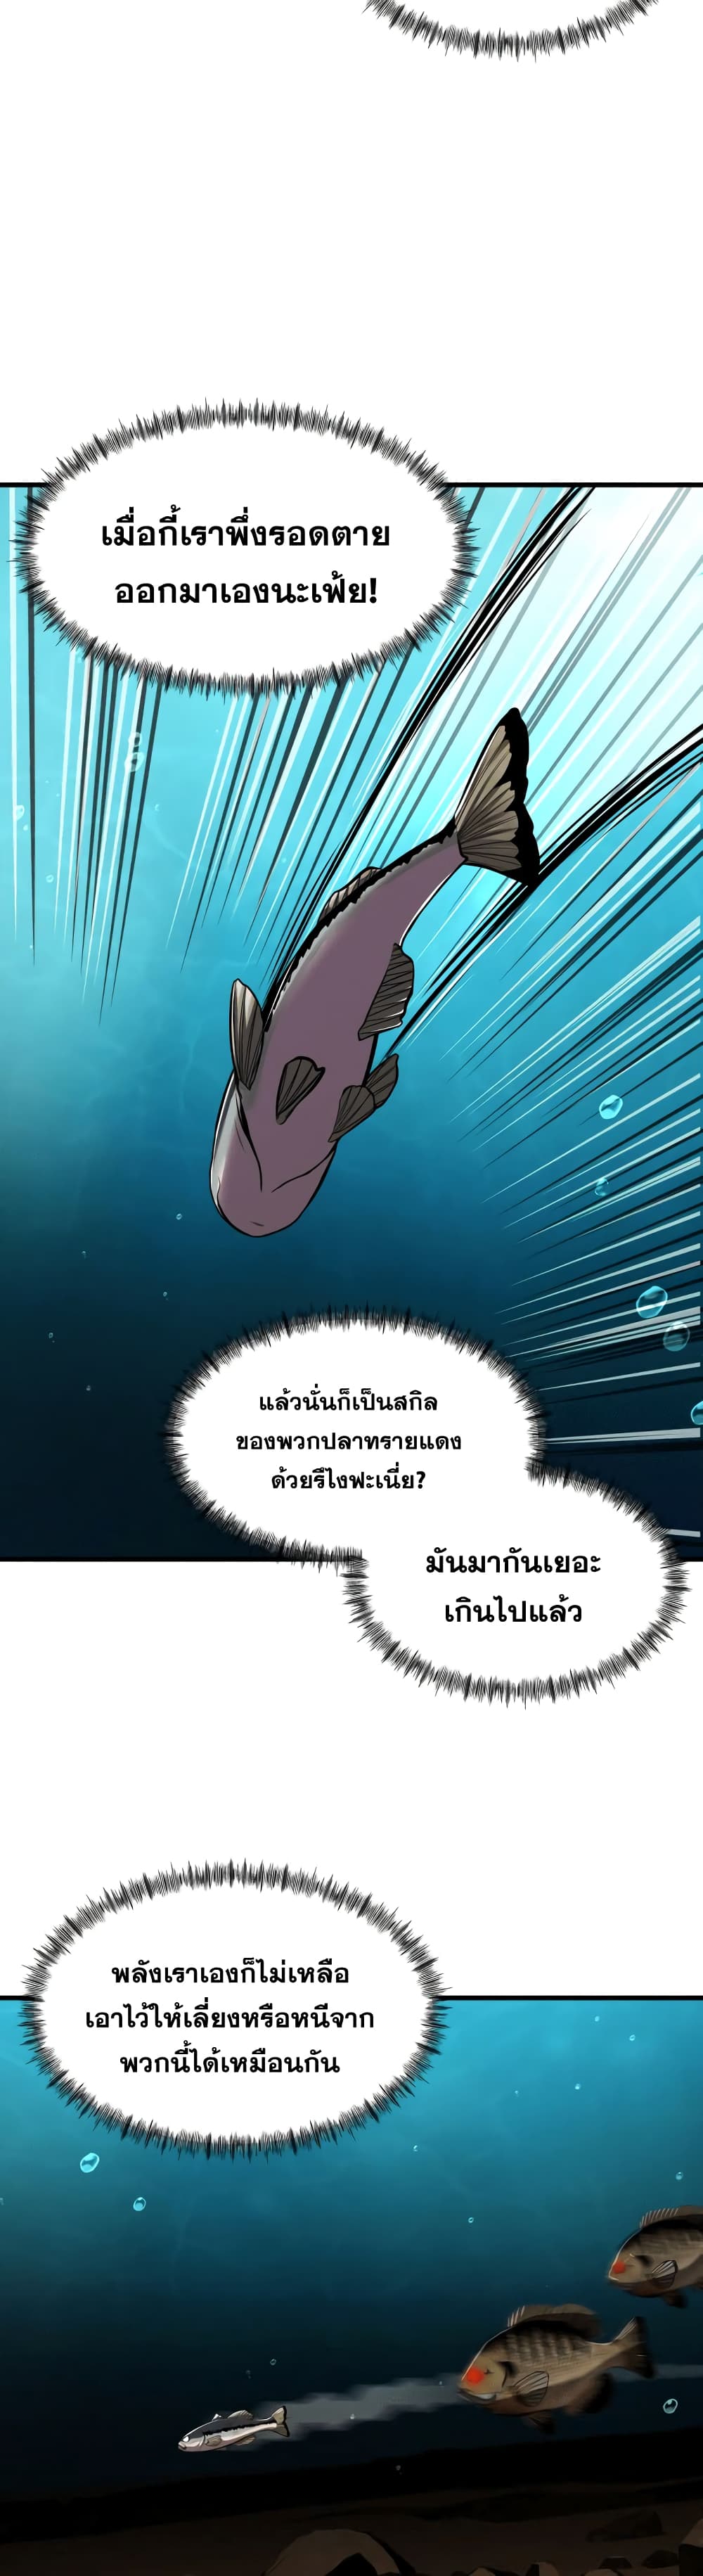 Surviving As a Fish8 (7)